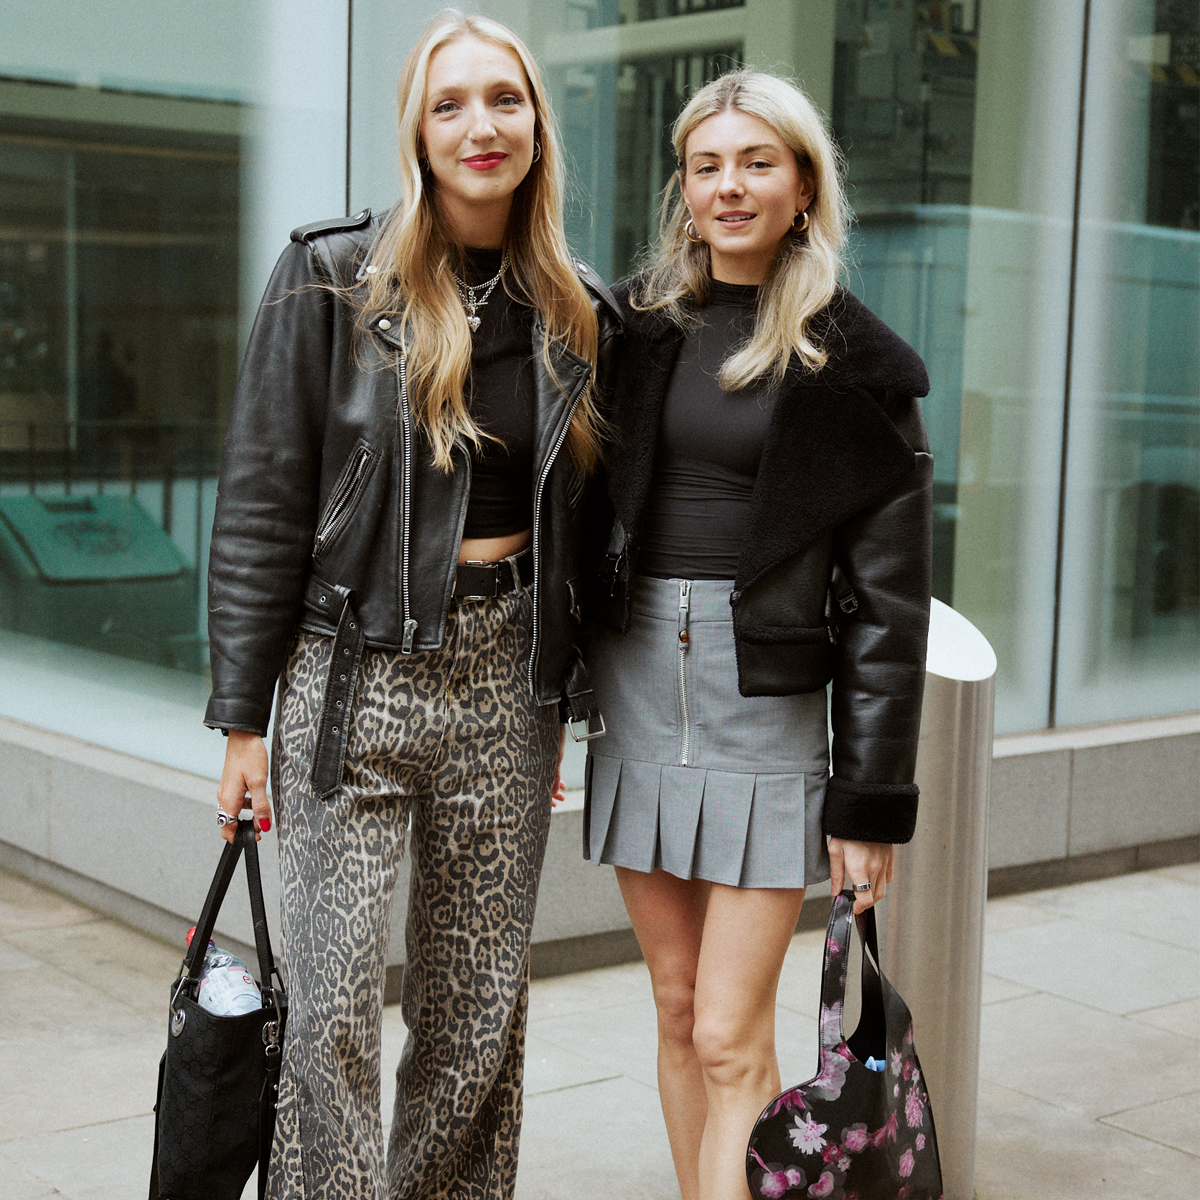 We Went Street Style-Spotting in London—These 17 Outfits Wowed Us